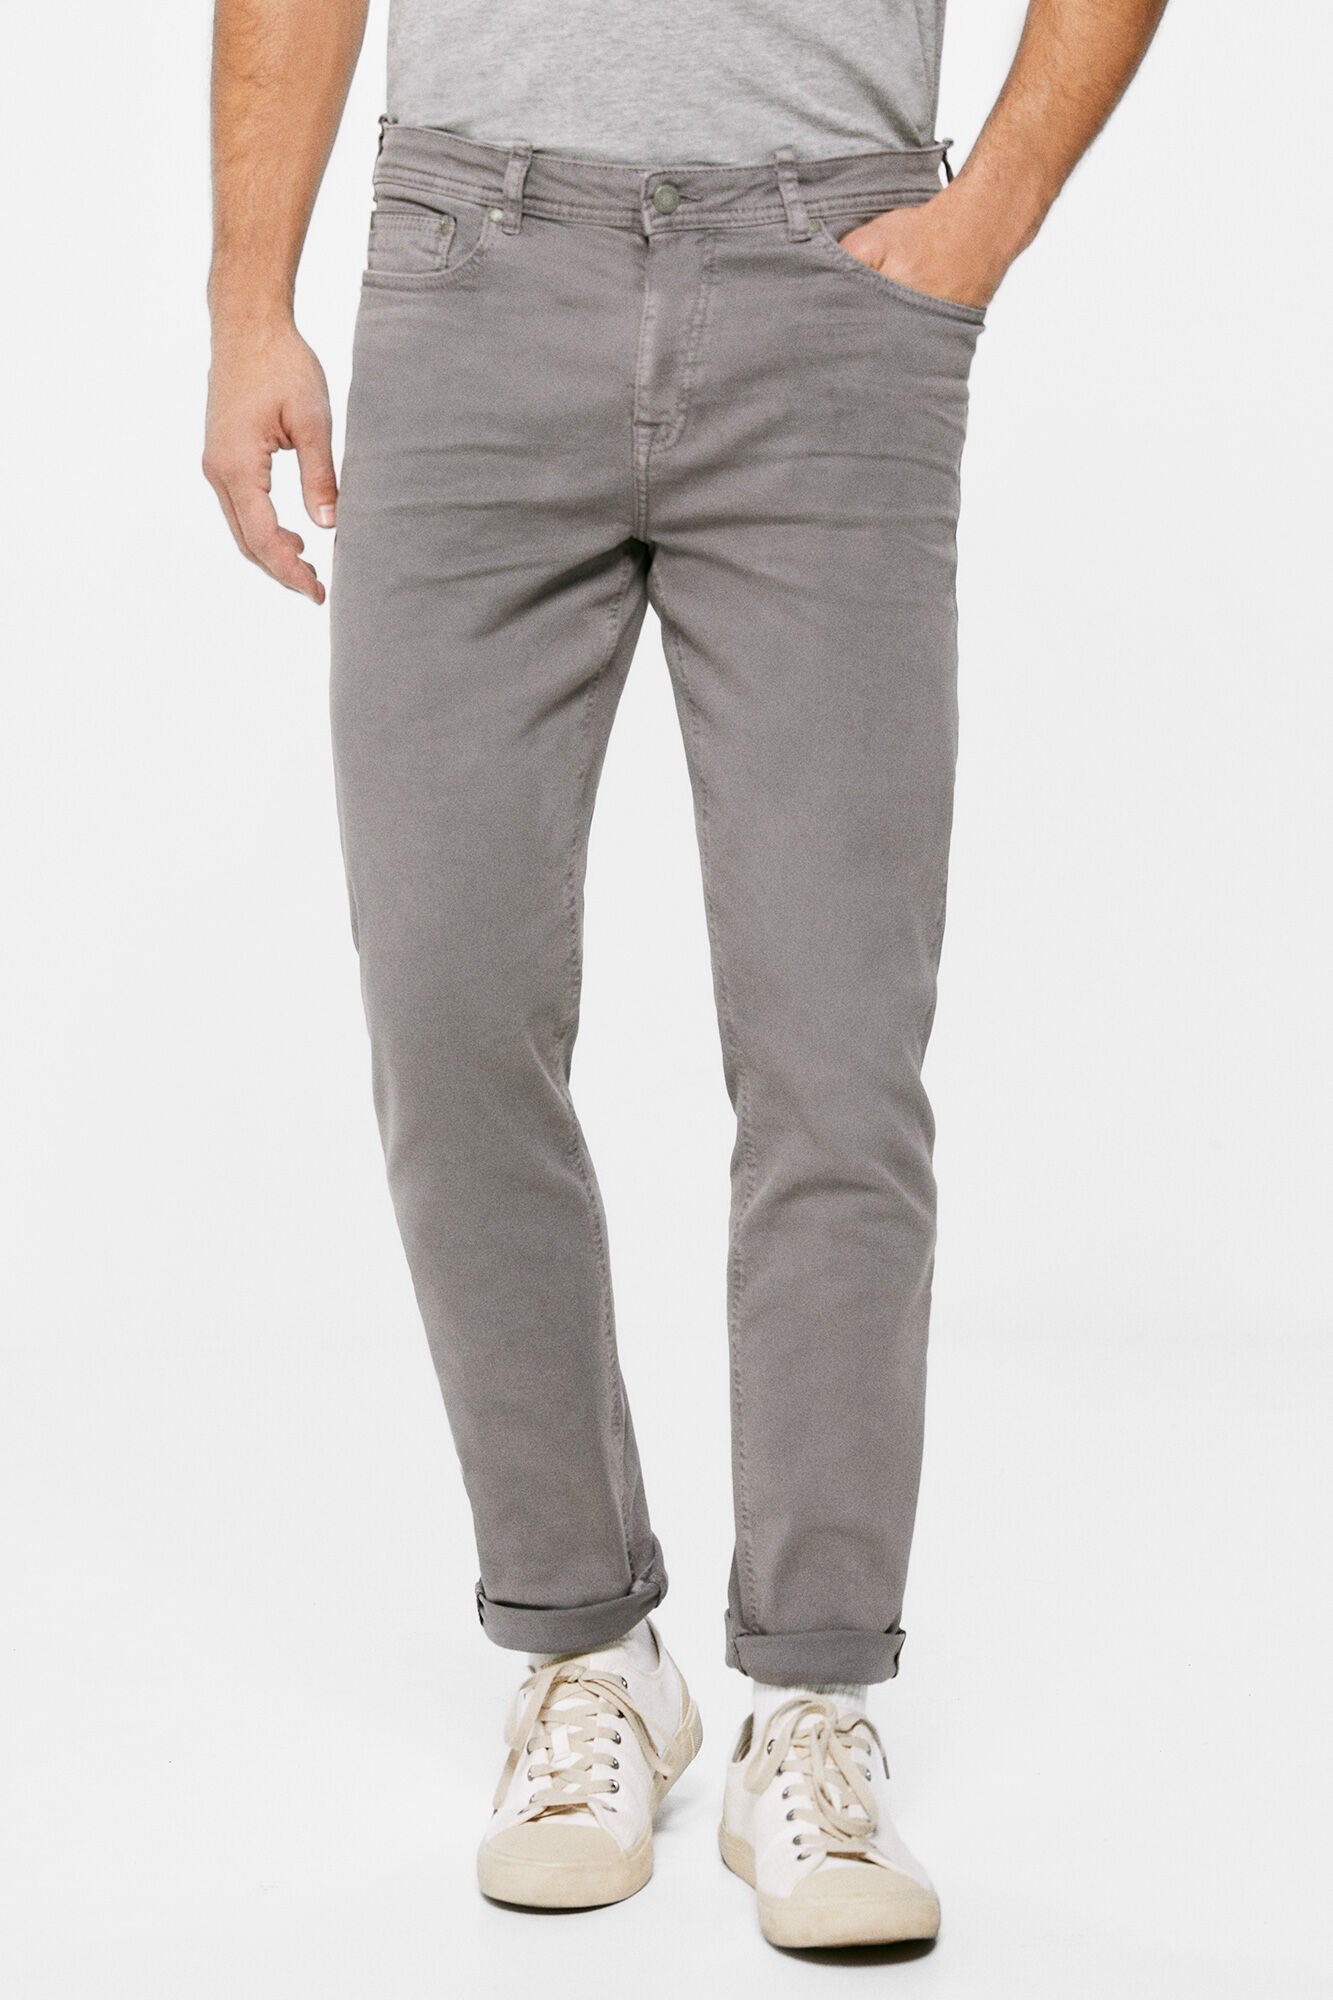 Ash Grey Cotton Sport Trouser with 5 pockets